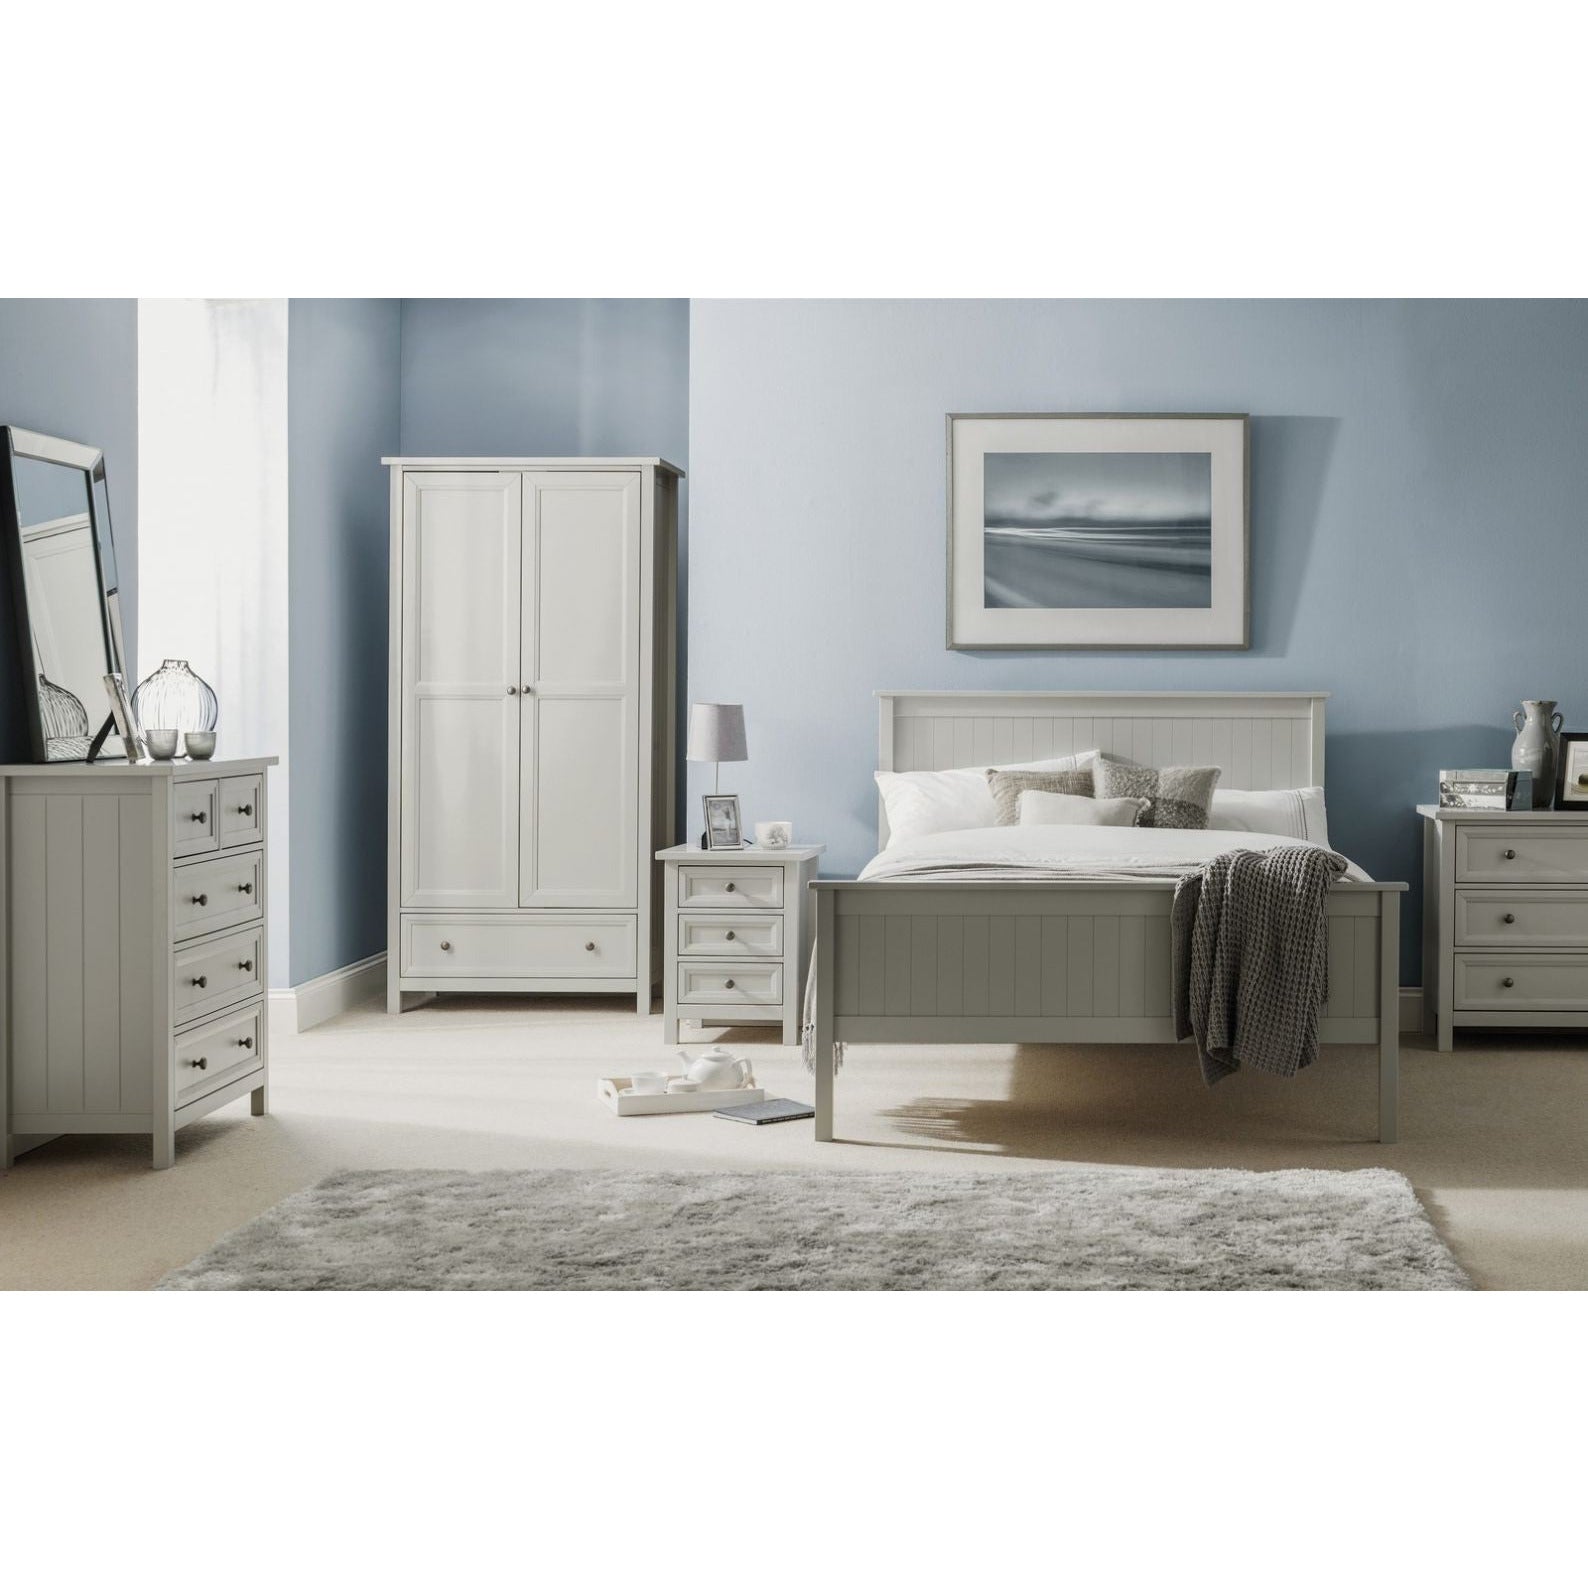 MAINE 5 DRAWER TALL CHEST - DOVE GREY